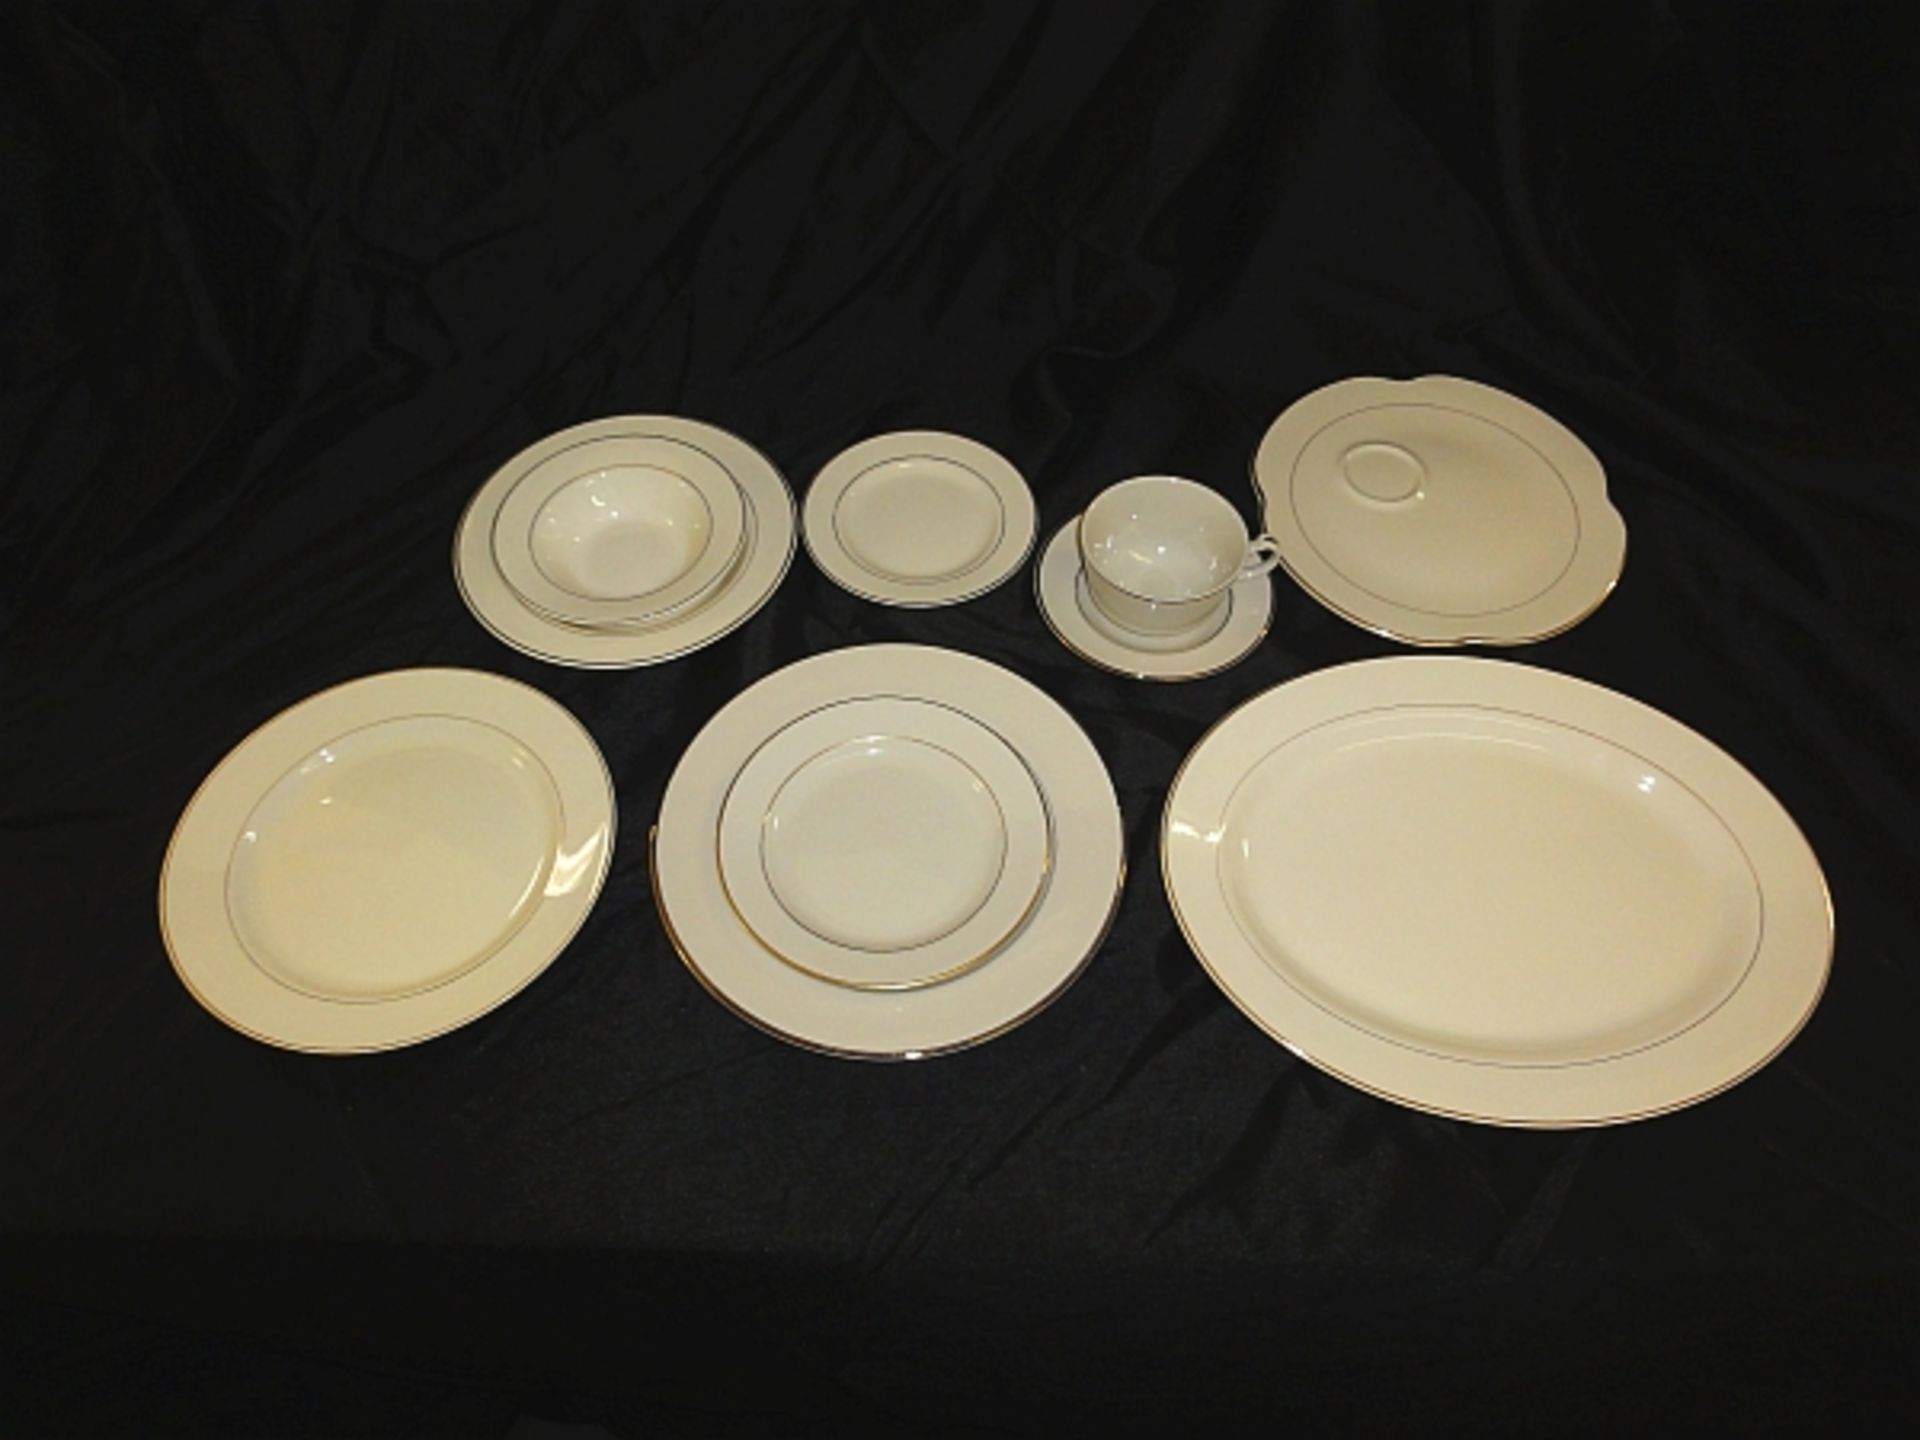 LOT OF 246 IVORY 10" DINNER PLATE W/ GOLD RIM- LOT COME IN 12 MICROWIRE CRATES BILLED @ $18 EA. - Image 2 of 2